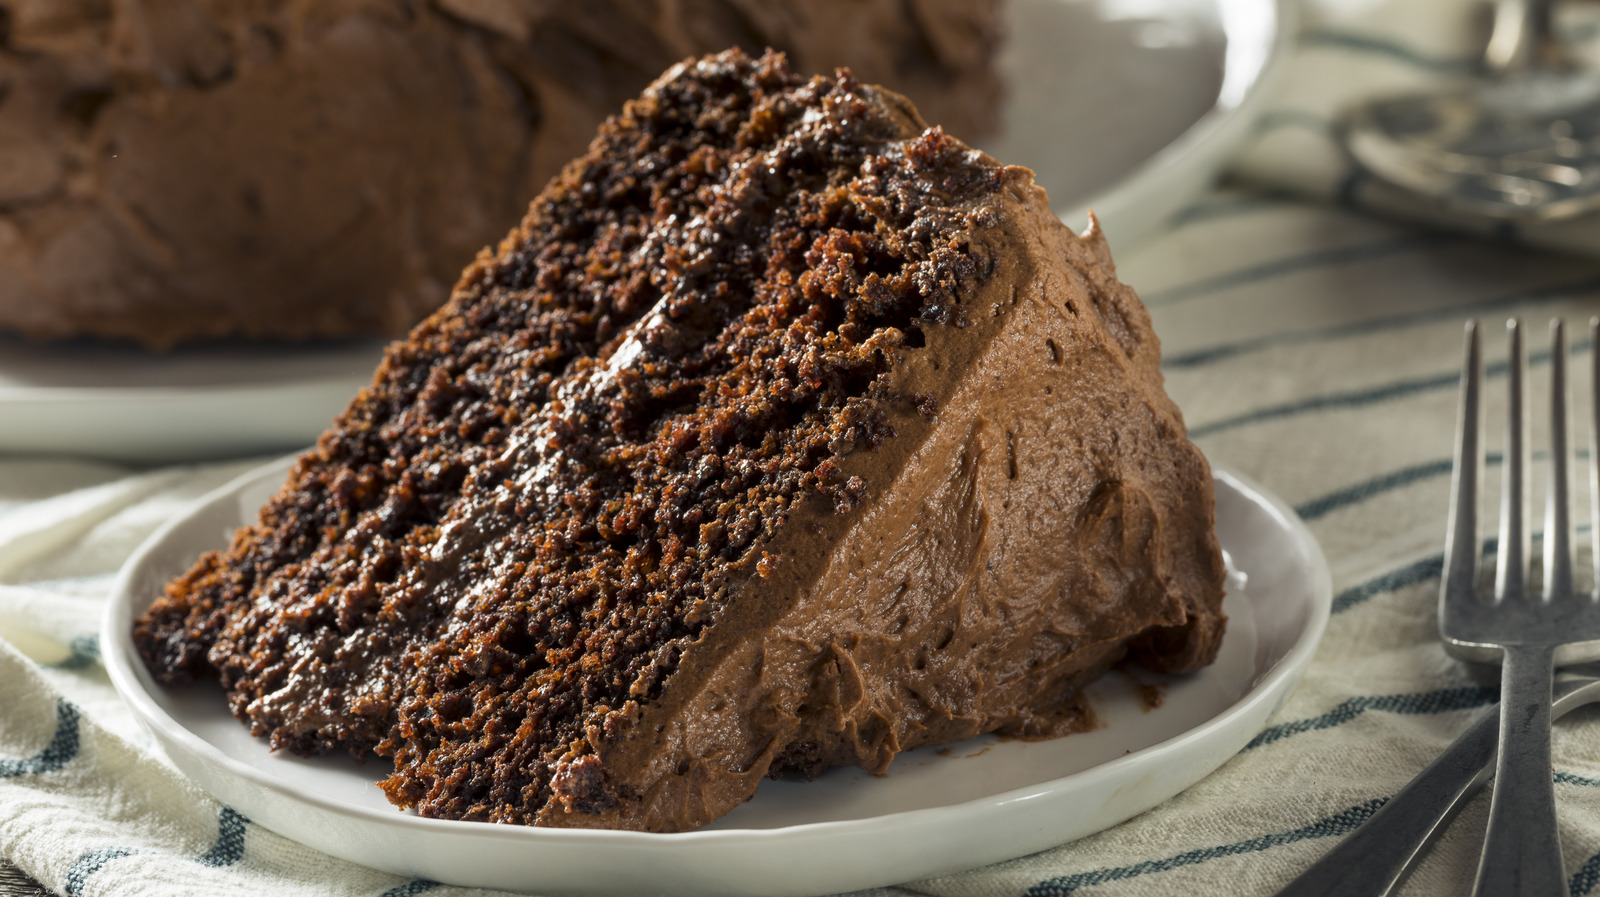 Incredible Classic Chocolate Cake Recipe with Fudge Frosting